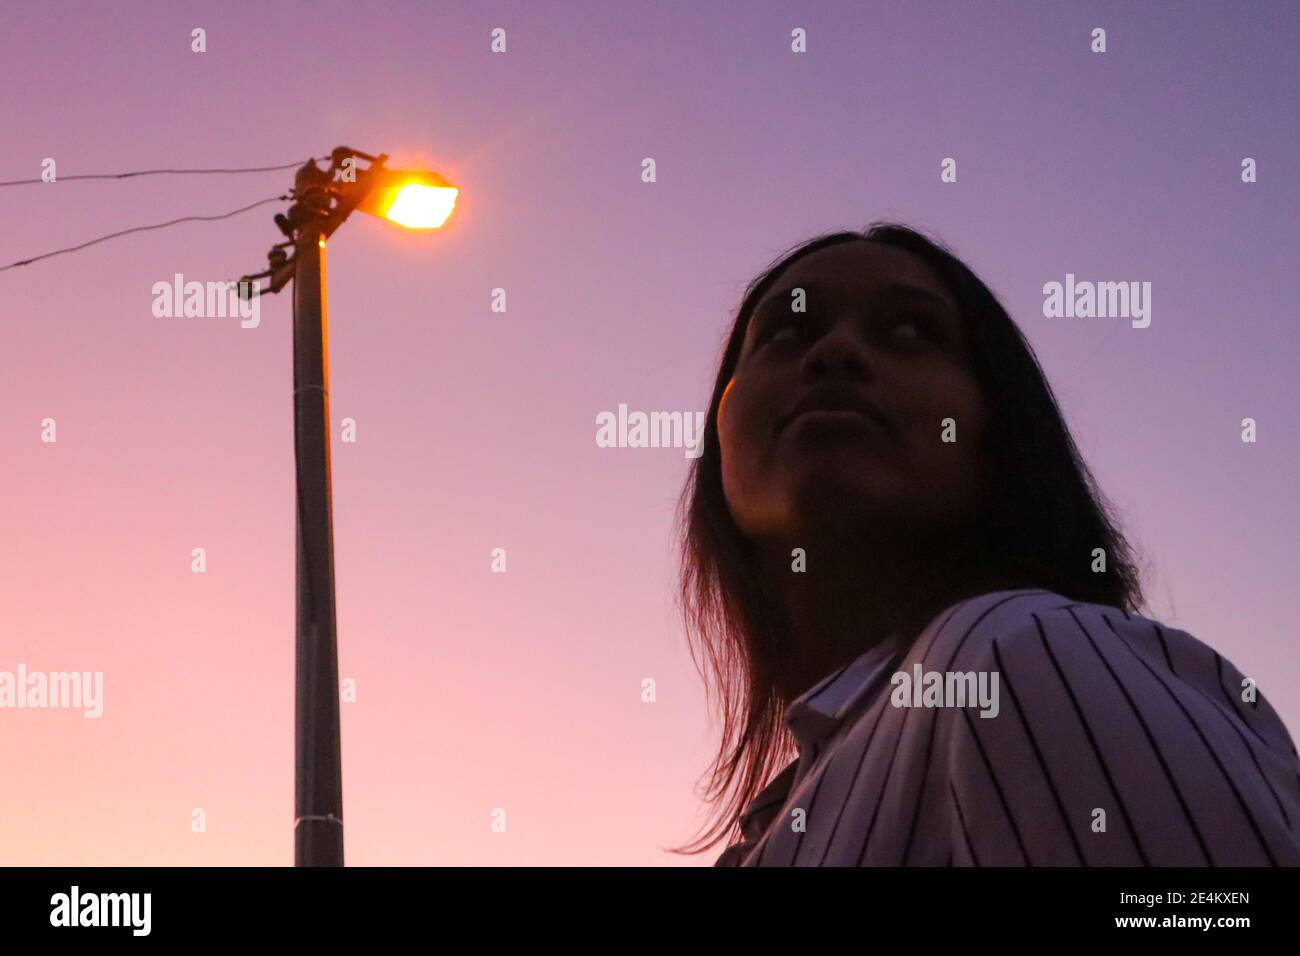 Cape Town, South Africa - 20-02-2020 Creative and hazy purple sunset and street lamp. Stylish young woman silhouetted in foreground. Stock Photo